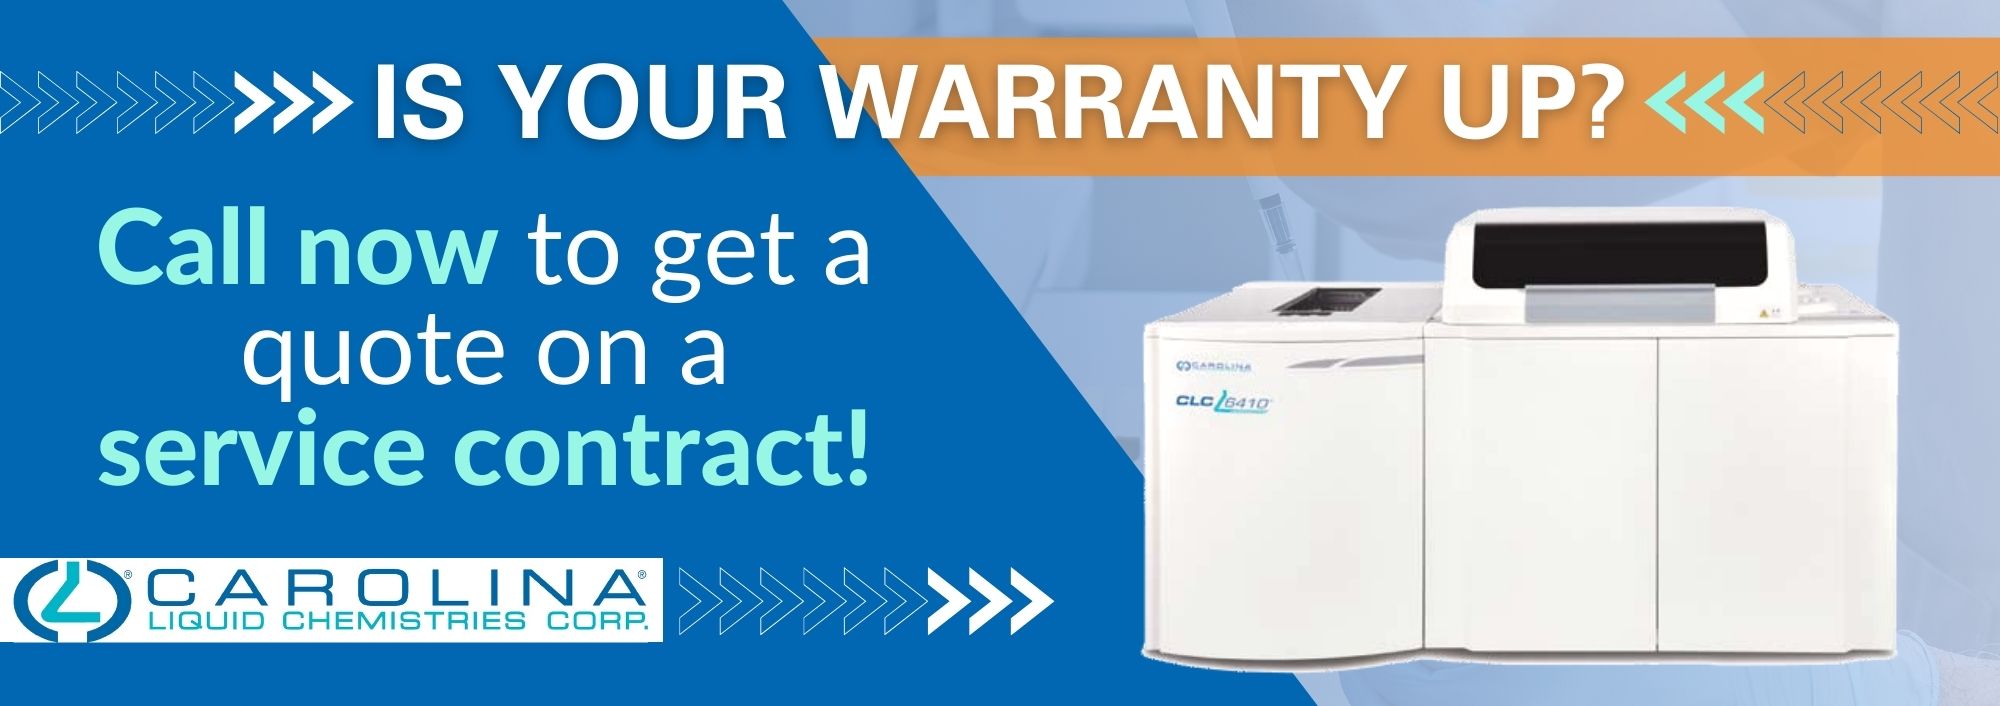 Is your chemistry analyzer warranty up? Get a quote from CLC for a service contract.